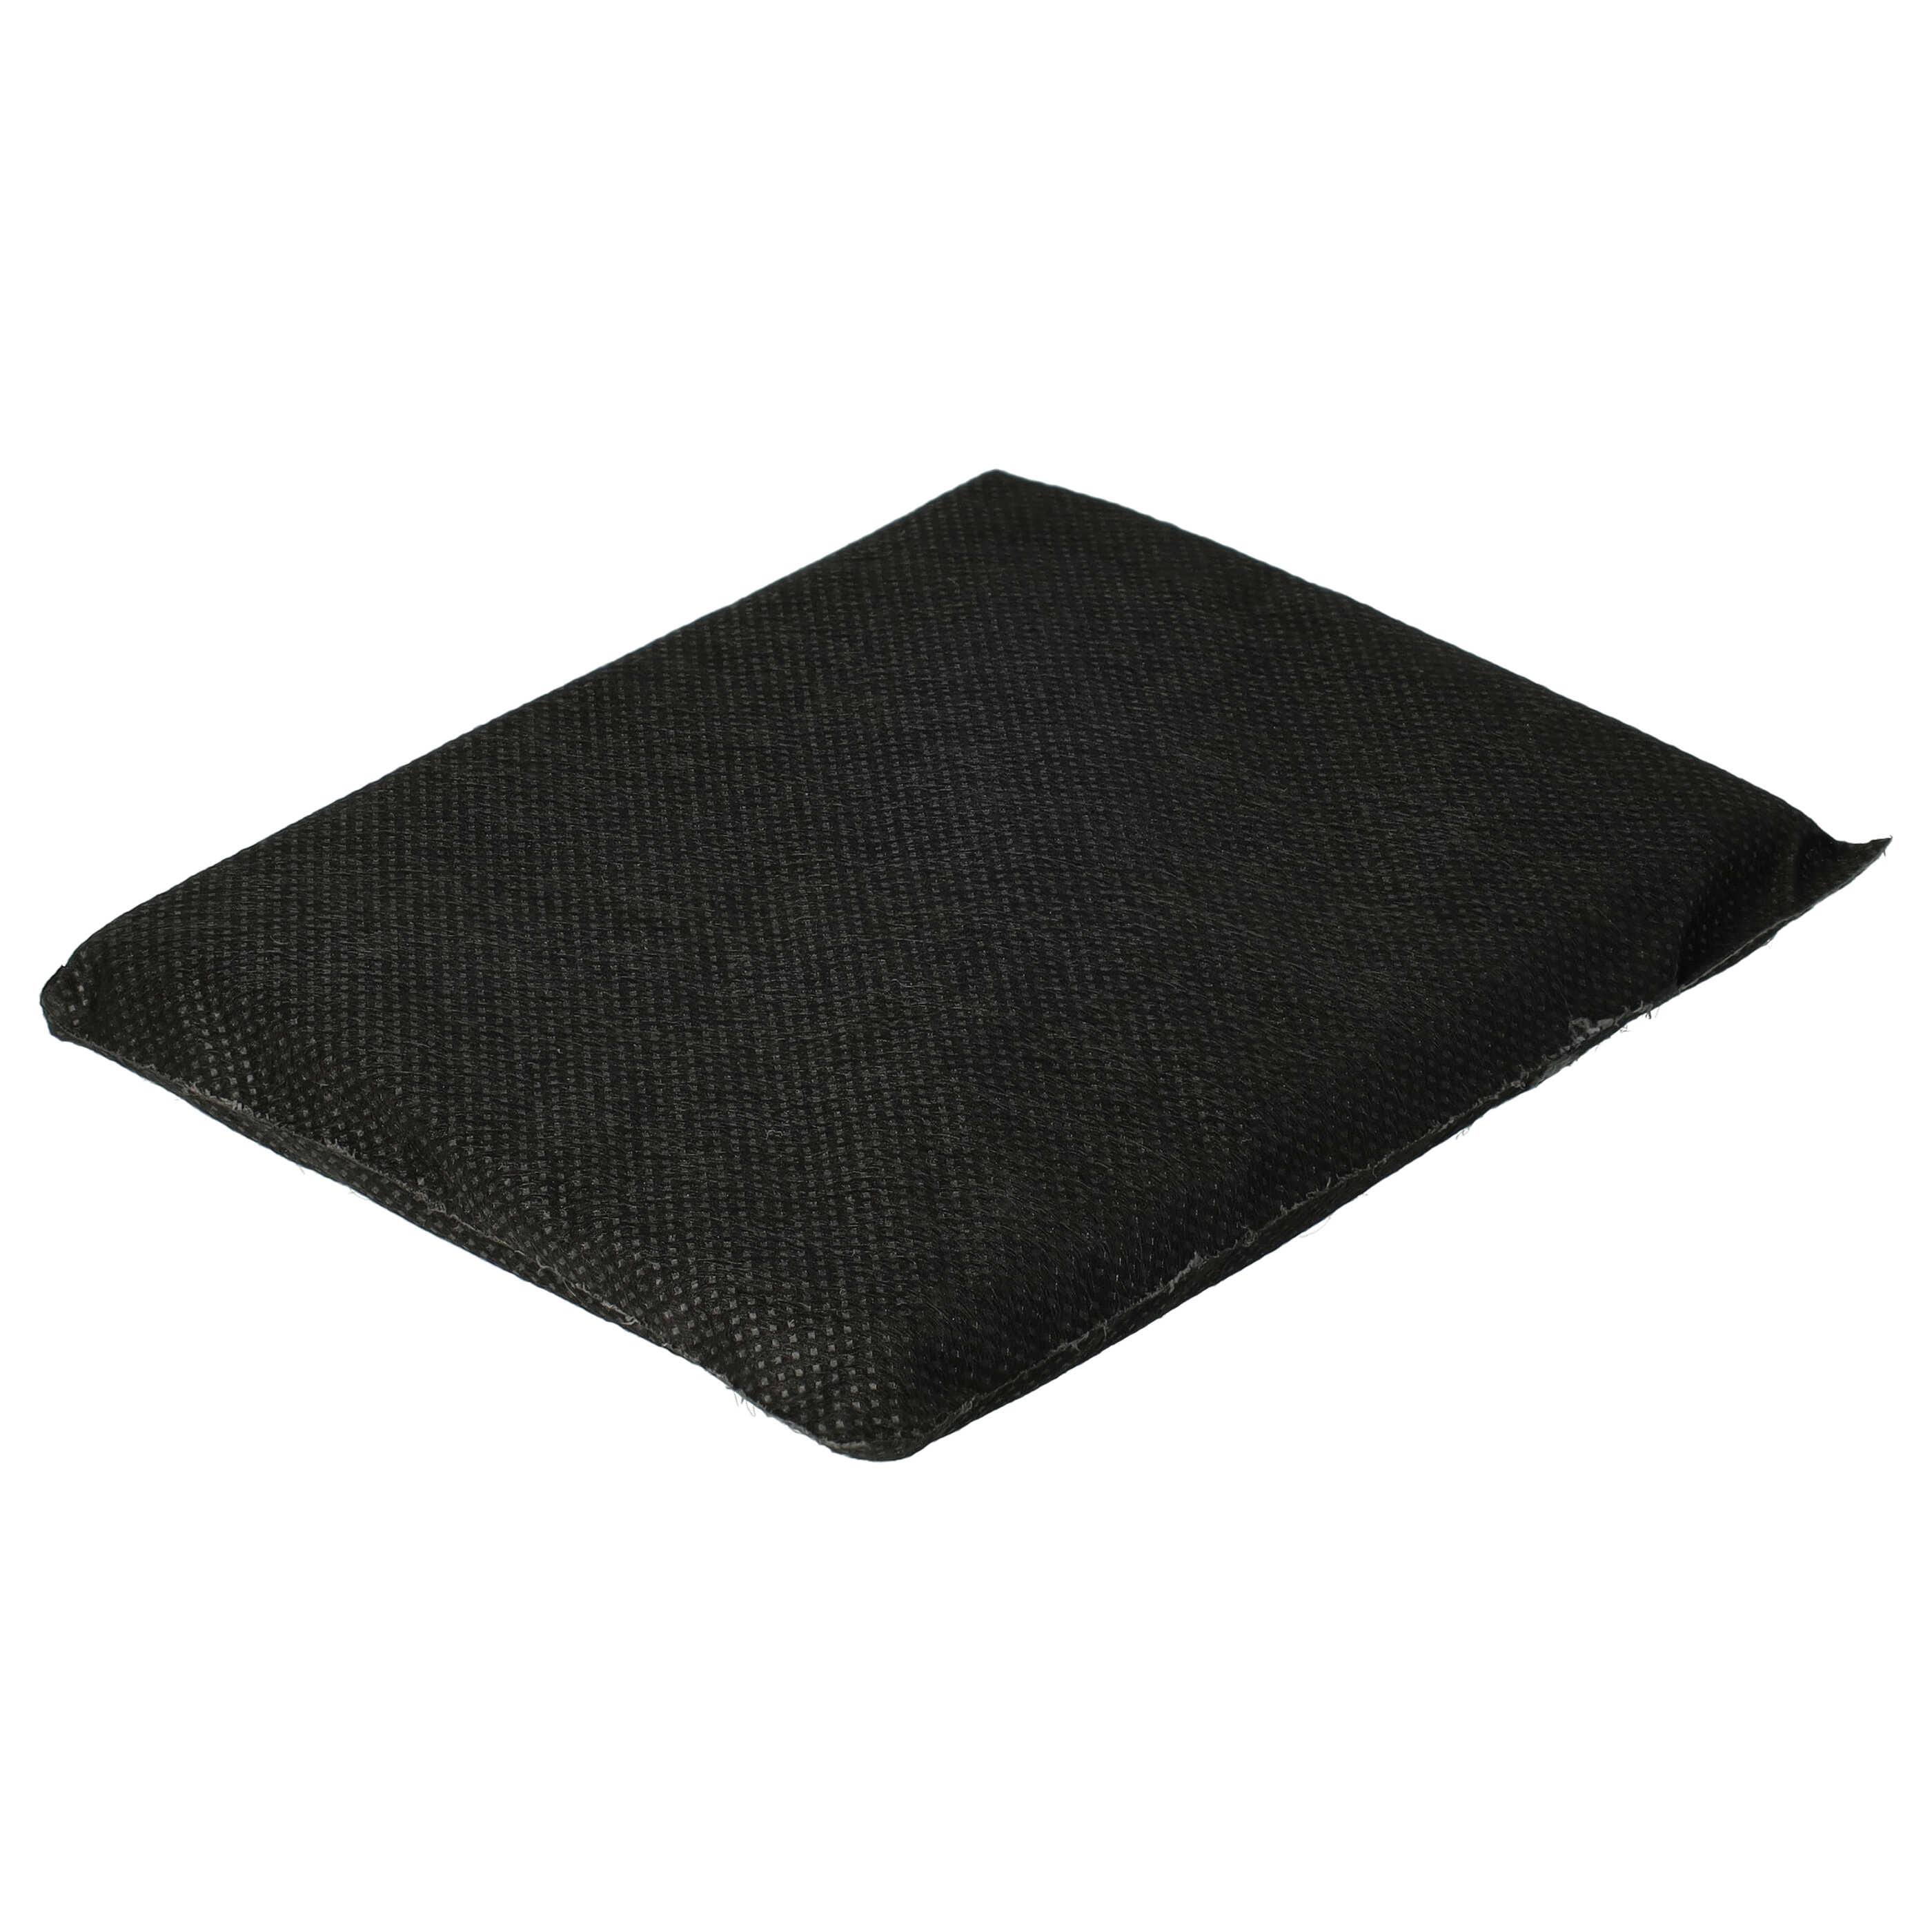 Activated Carbon Filter replaces AEG/Electrolux 2081625036, 2081625010 for Juno Refrigerator etc.